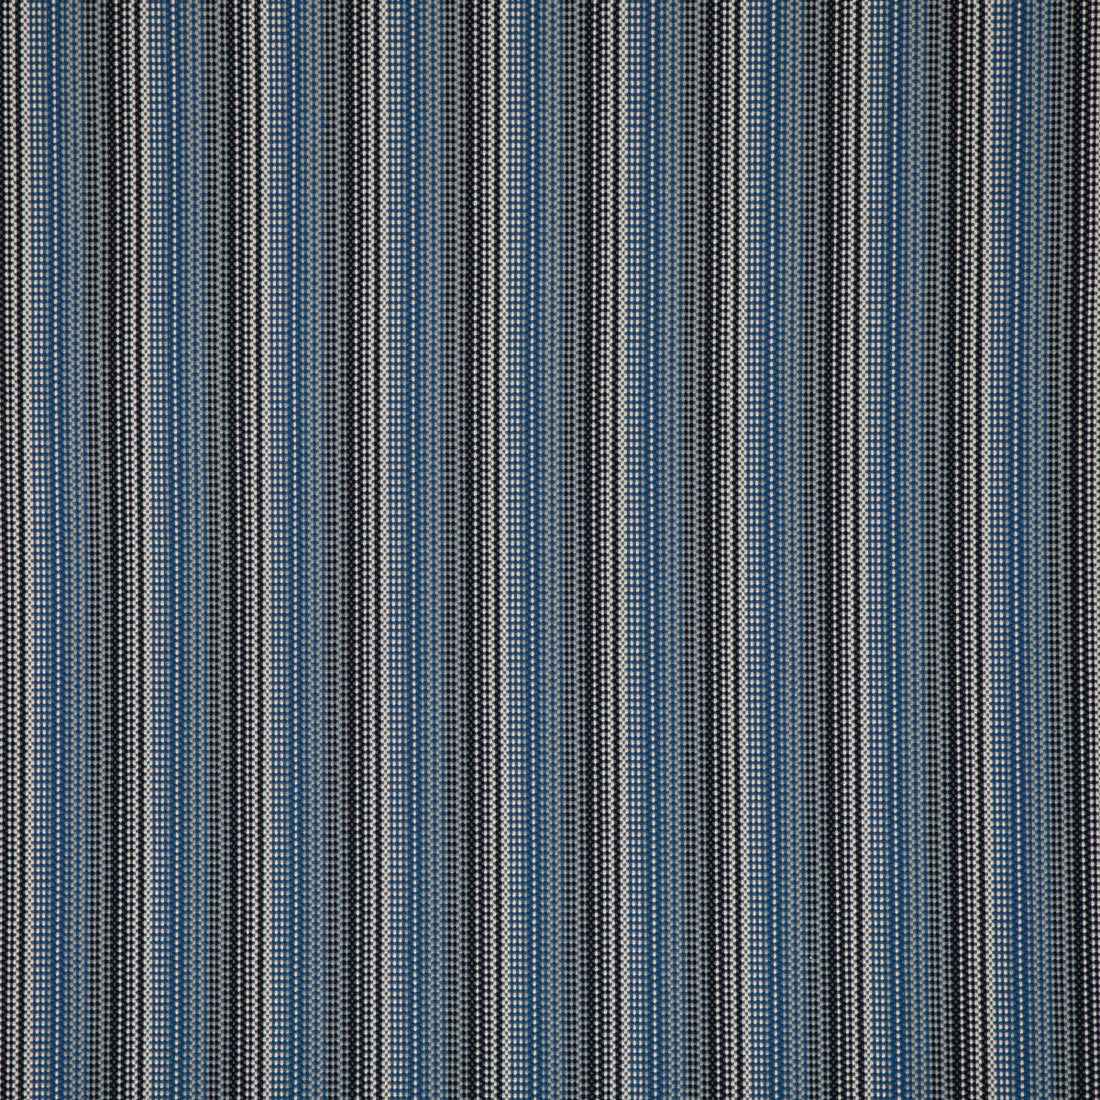 Baystreet fabric in coastal color - pattern 37068.521.0 - by Kravet Contract in the Chesapeake collection